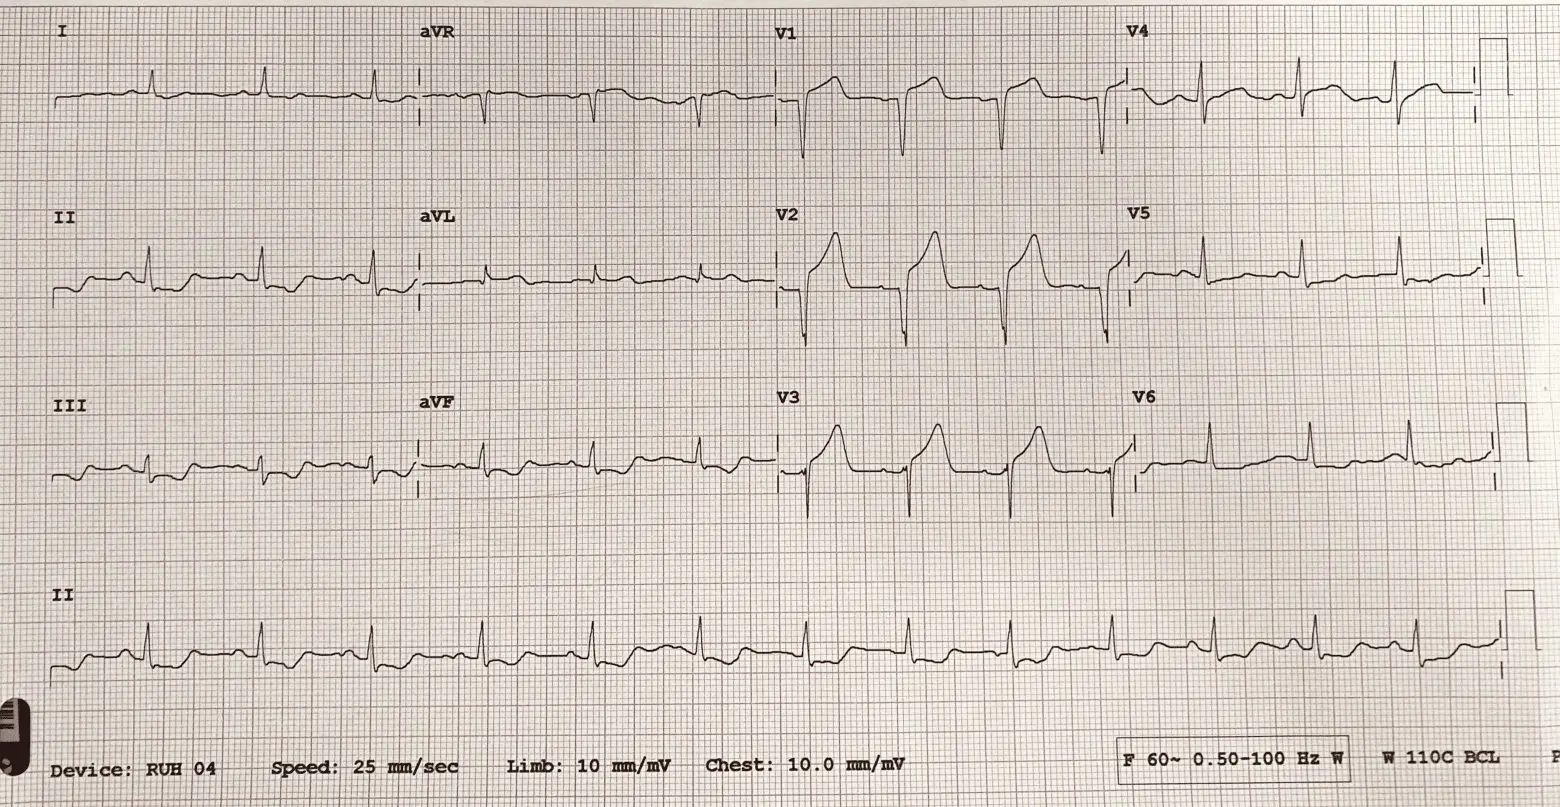 An ECG demonstrates the extensive antero-septal-lateral myocardial infarction [heart attack] that Taryn witnessed.